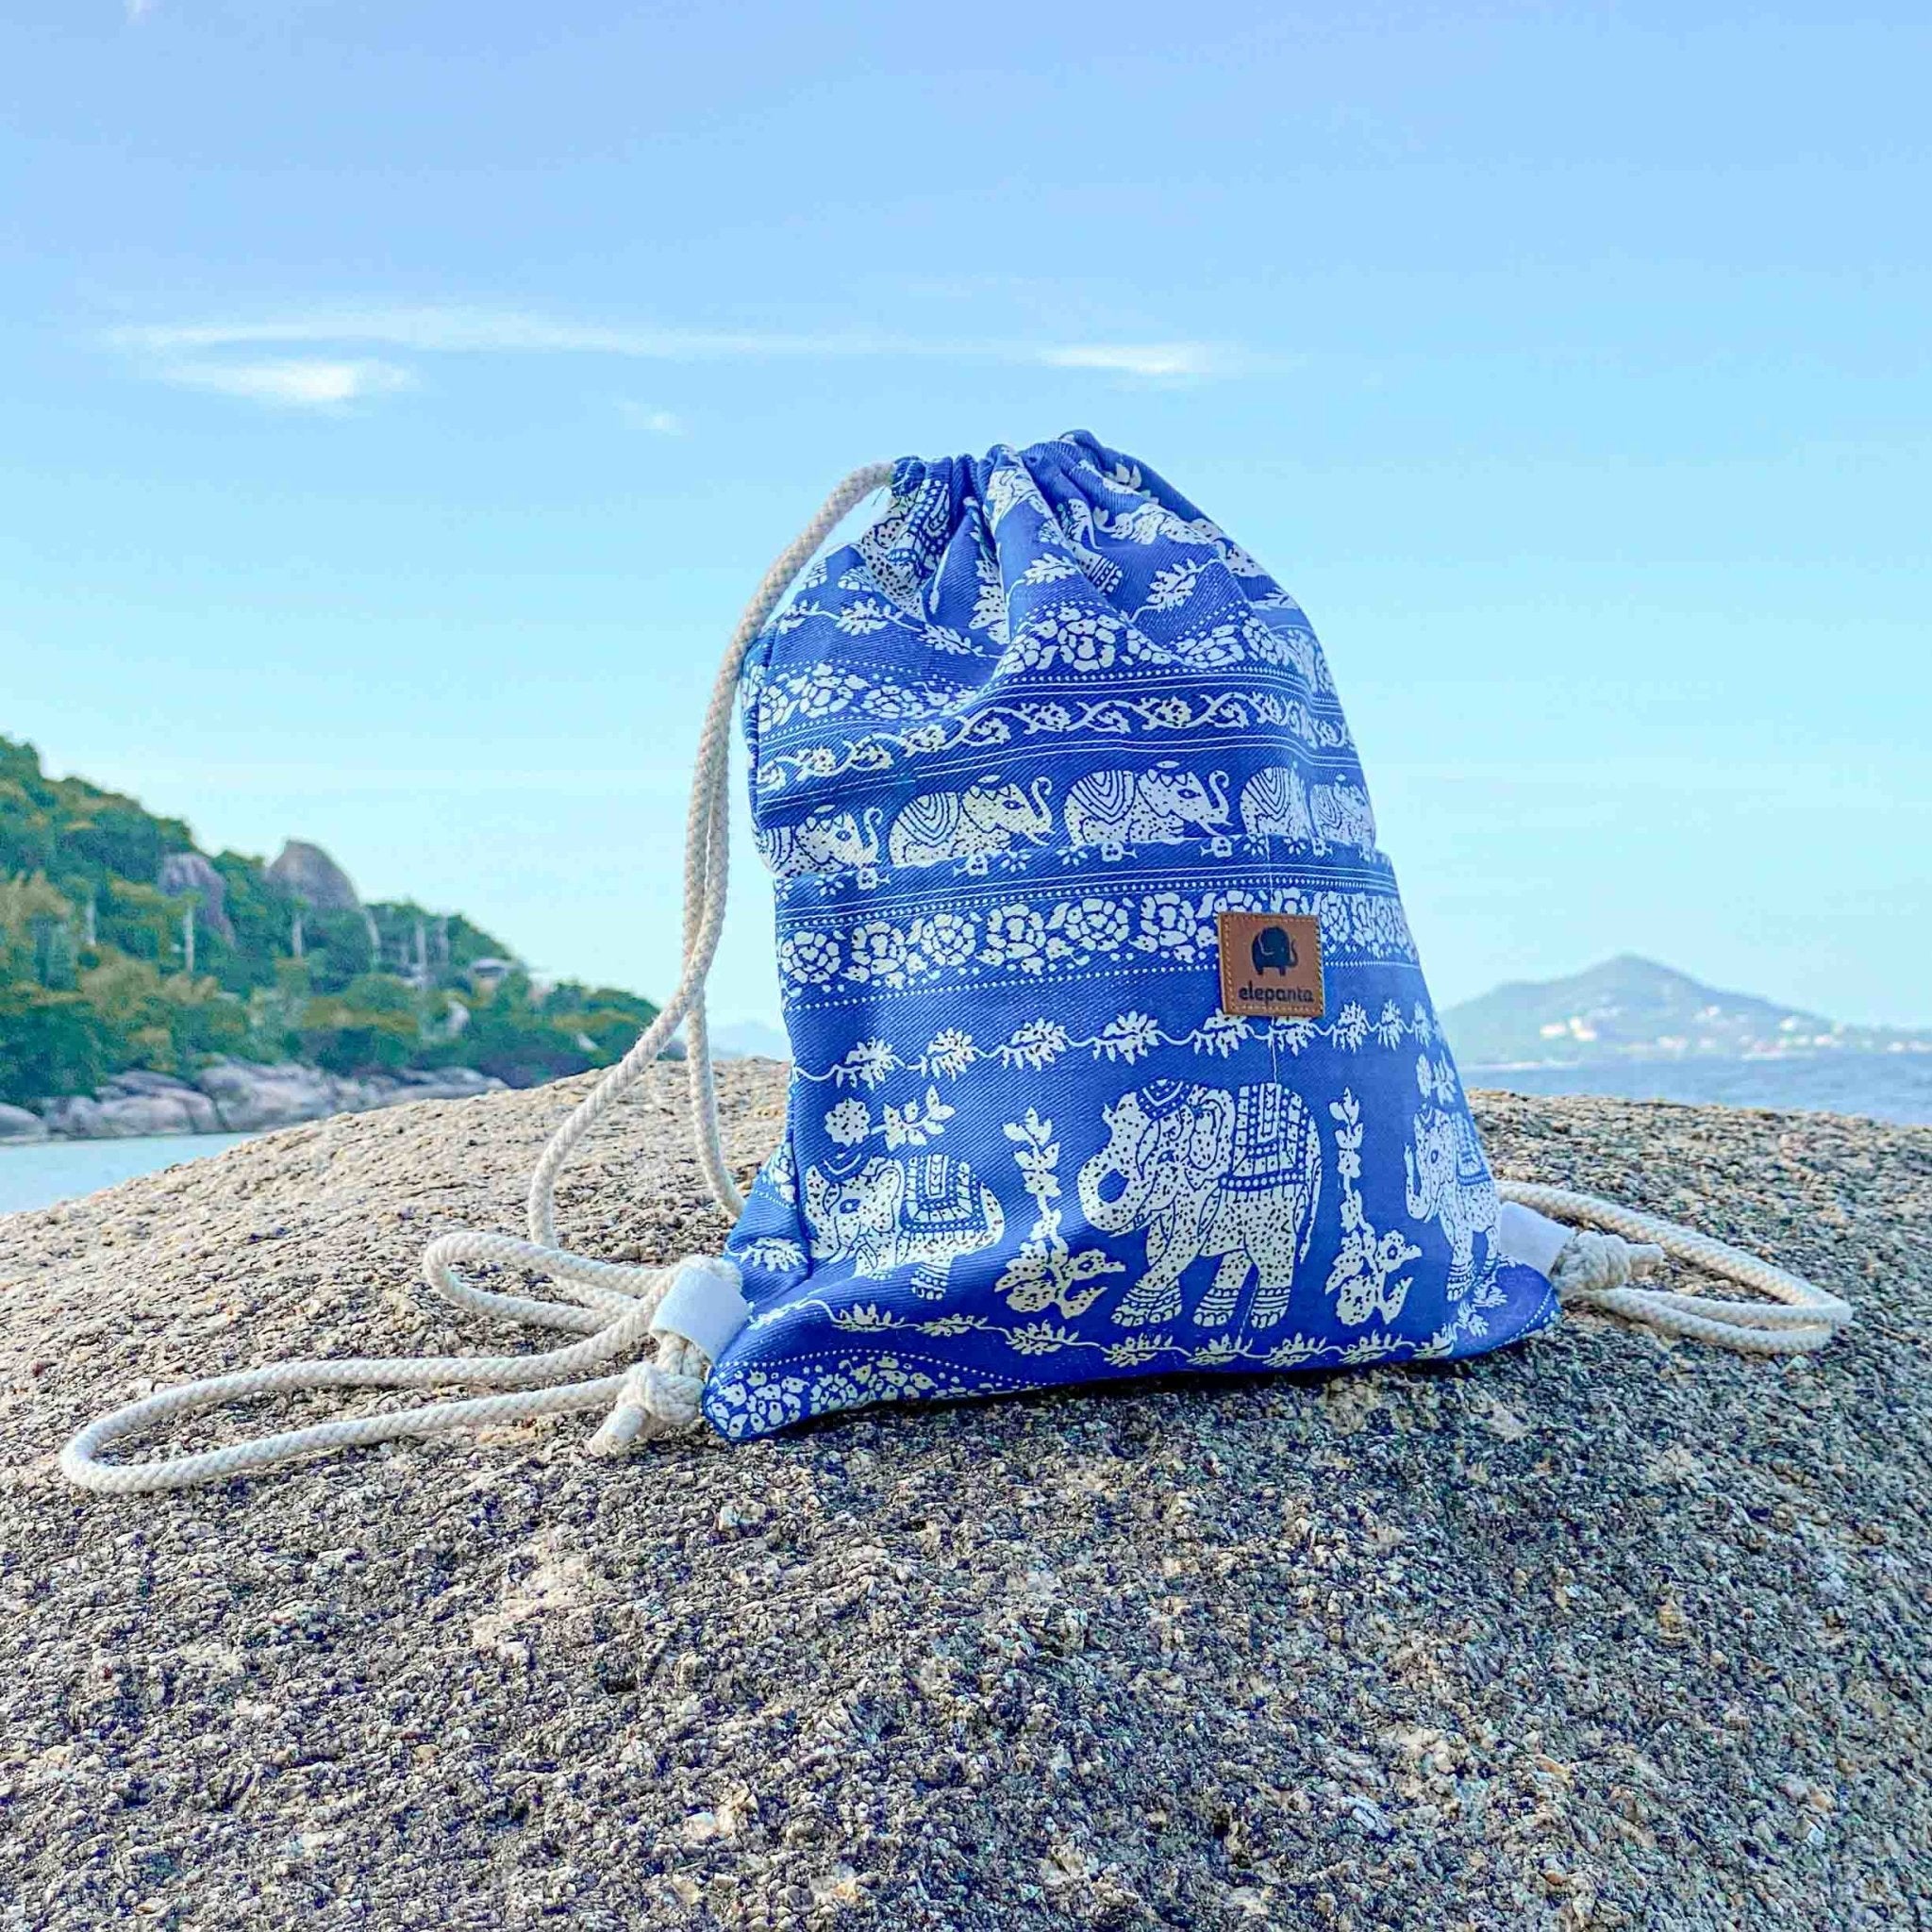 BALI DRAWSTRING BACKPACK Elepanta Backpacks - Buy Today Elephant Pants Jewelry And Bohemian Clothes Handmade In Thailand Help To Save The Elephants FairTrade And Vegan